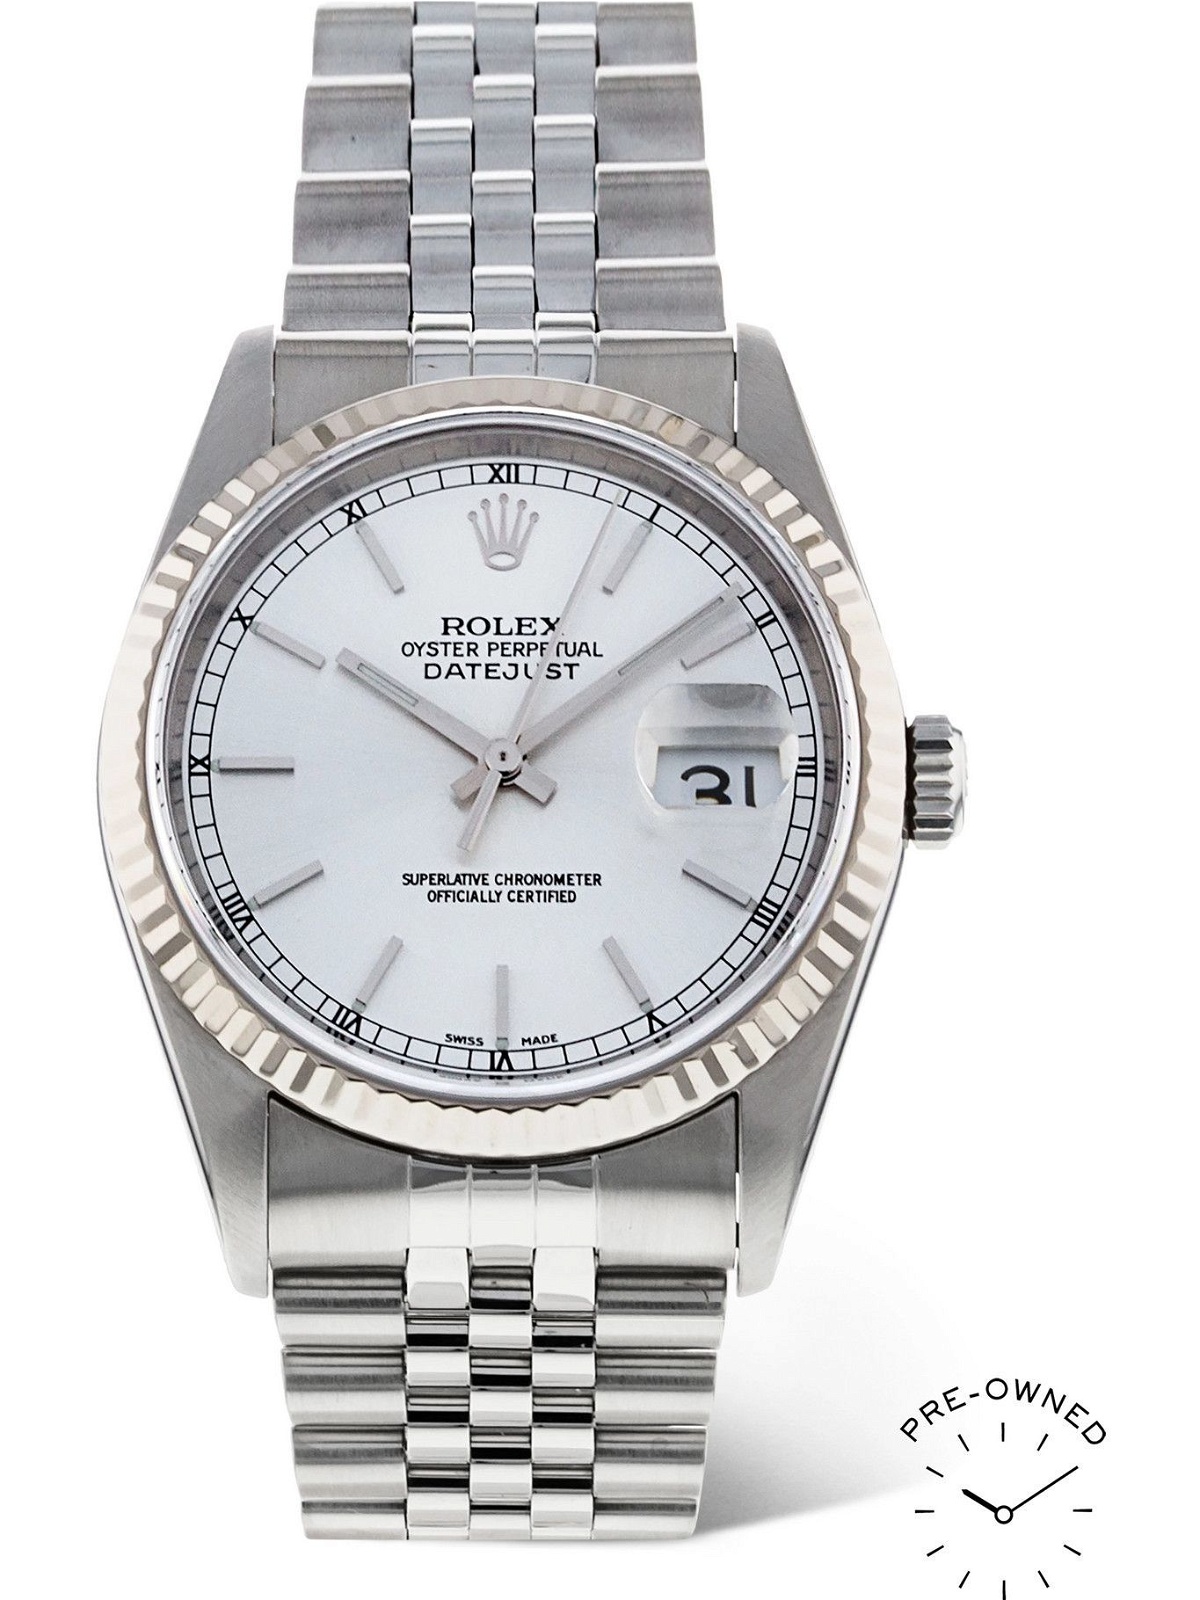 ROLEX - Pre-Owned 2001 Datejust Automatic 36mm Oystersteel and 18-Karat White Gold Watch, Ref. No. 189331